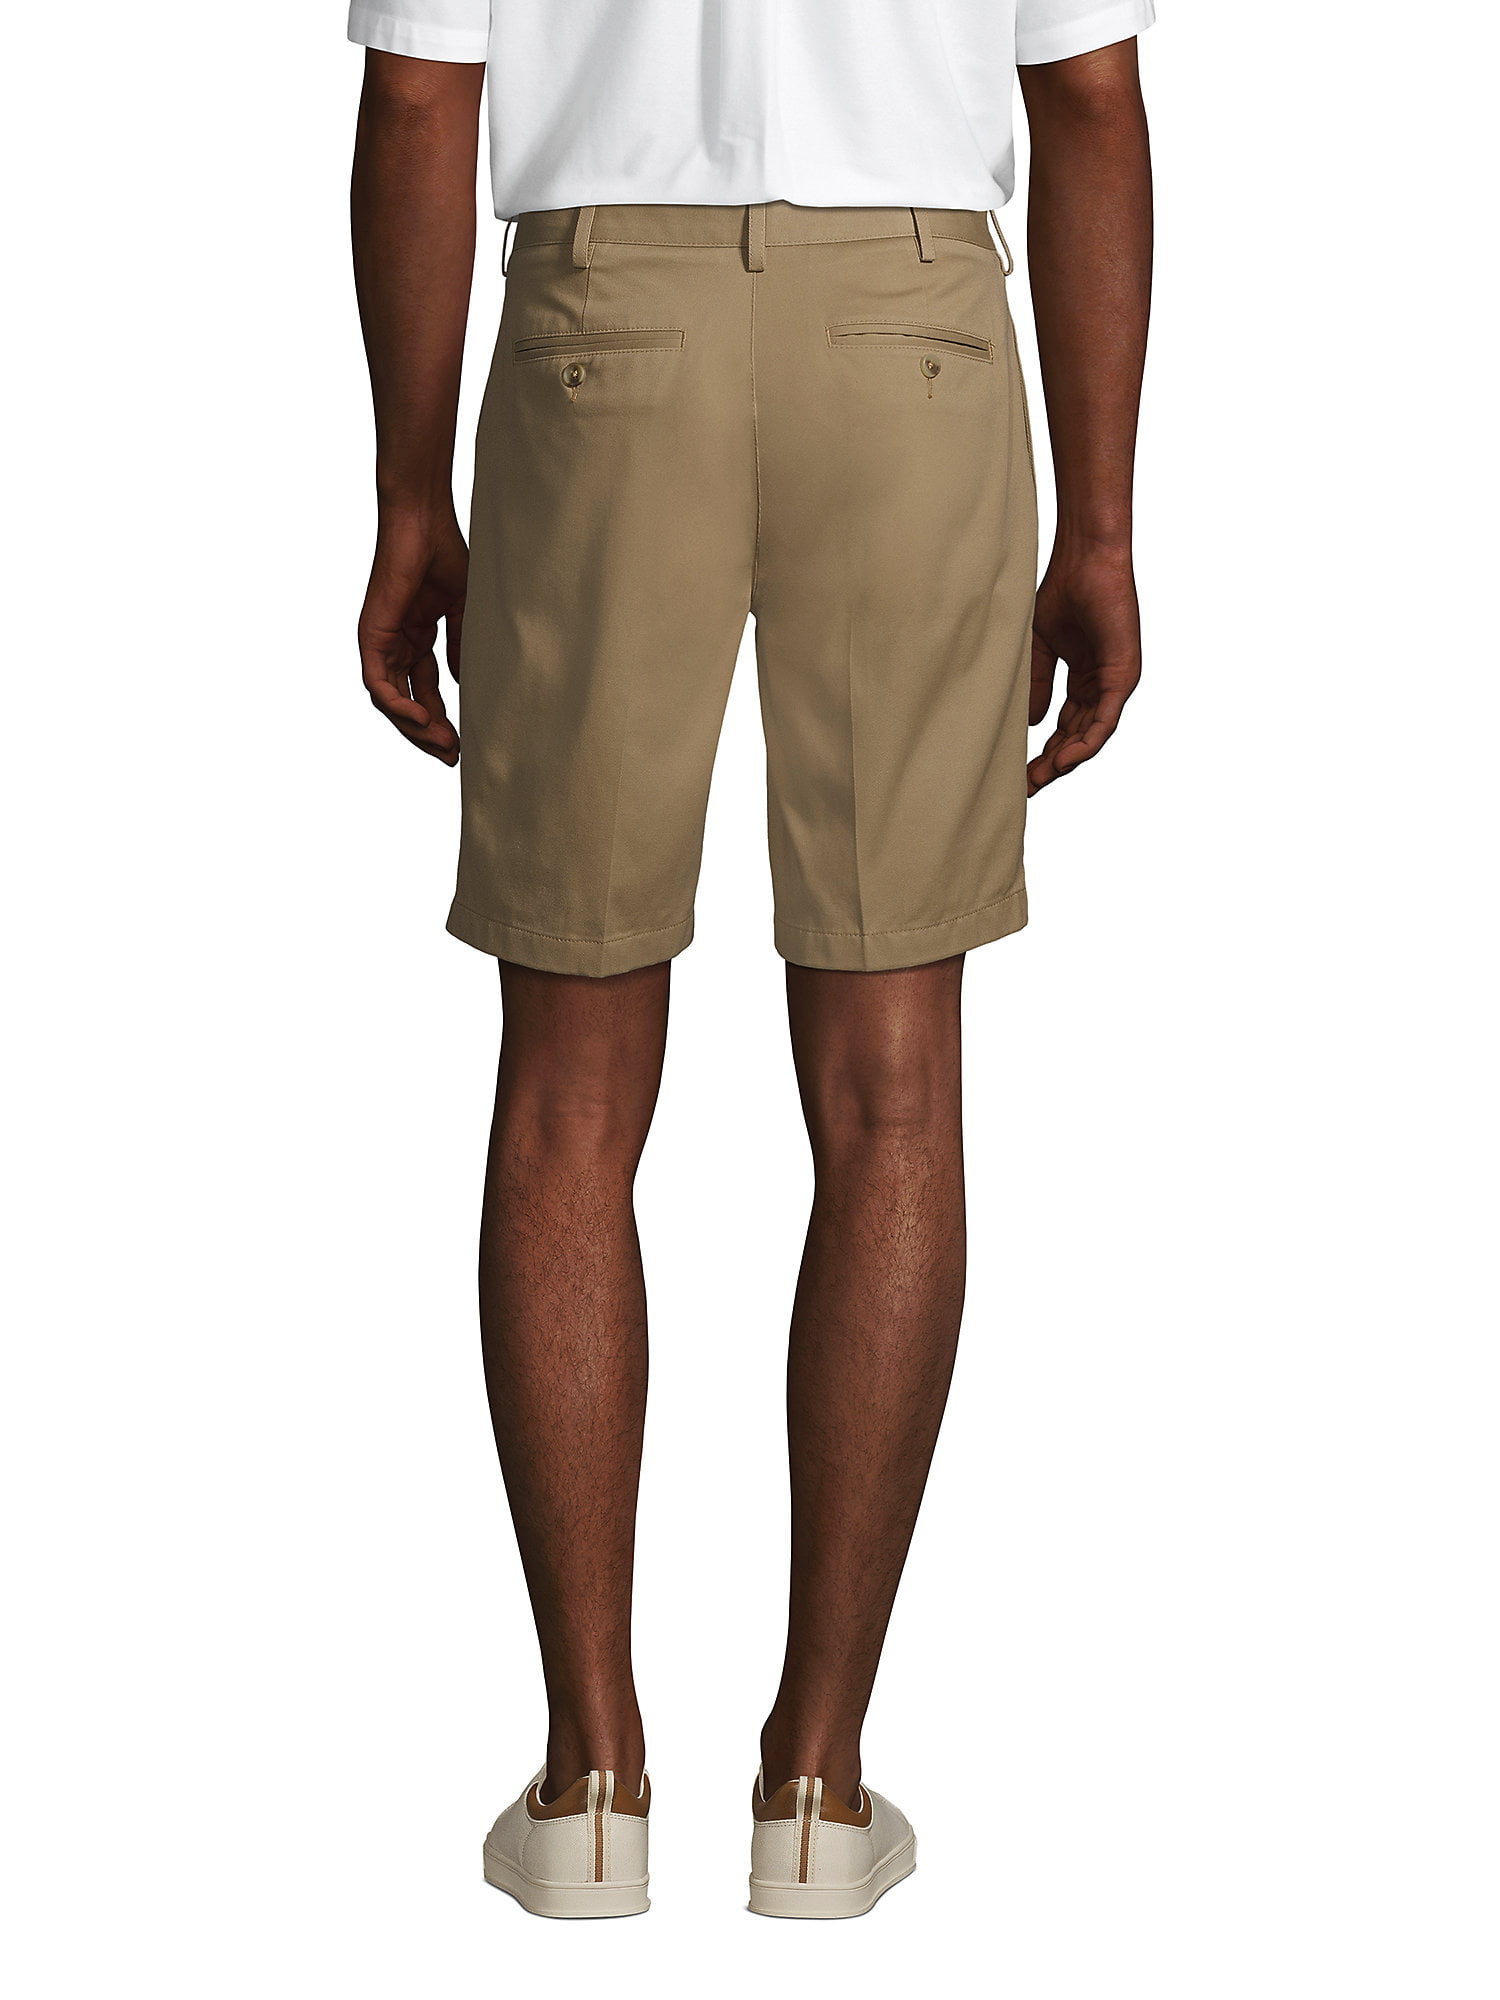 Lands' End Men's Traditional Fit 9 Inch No Iron Chino Shorts